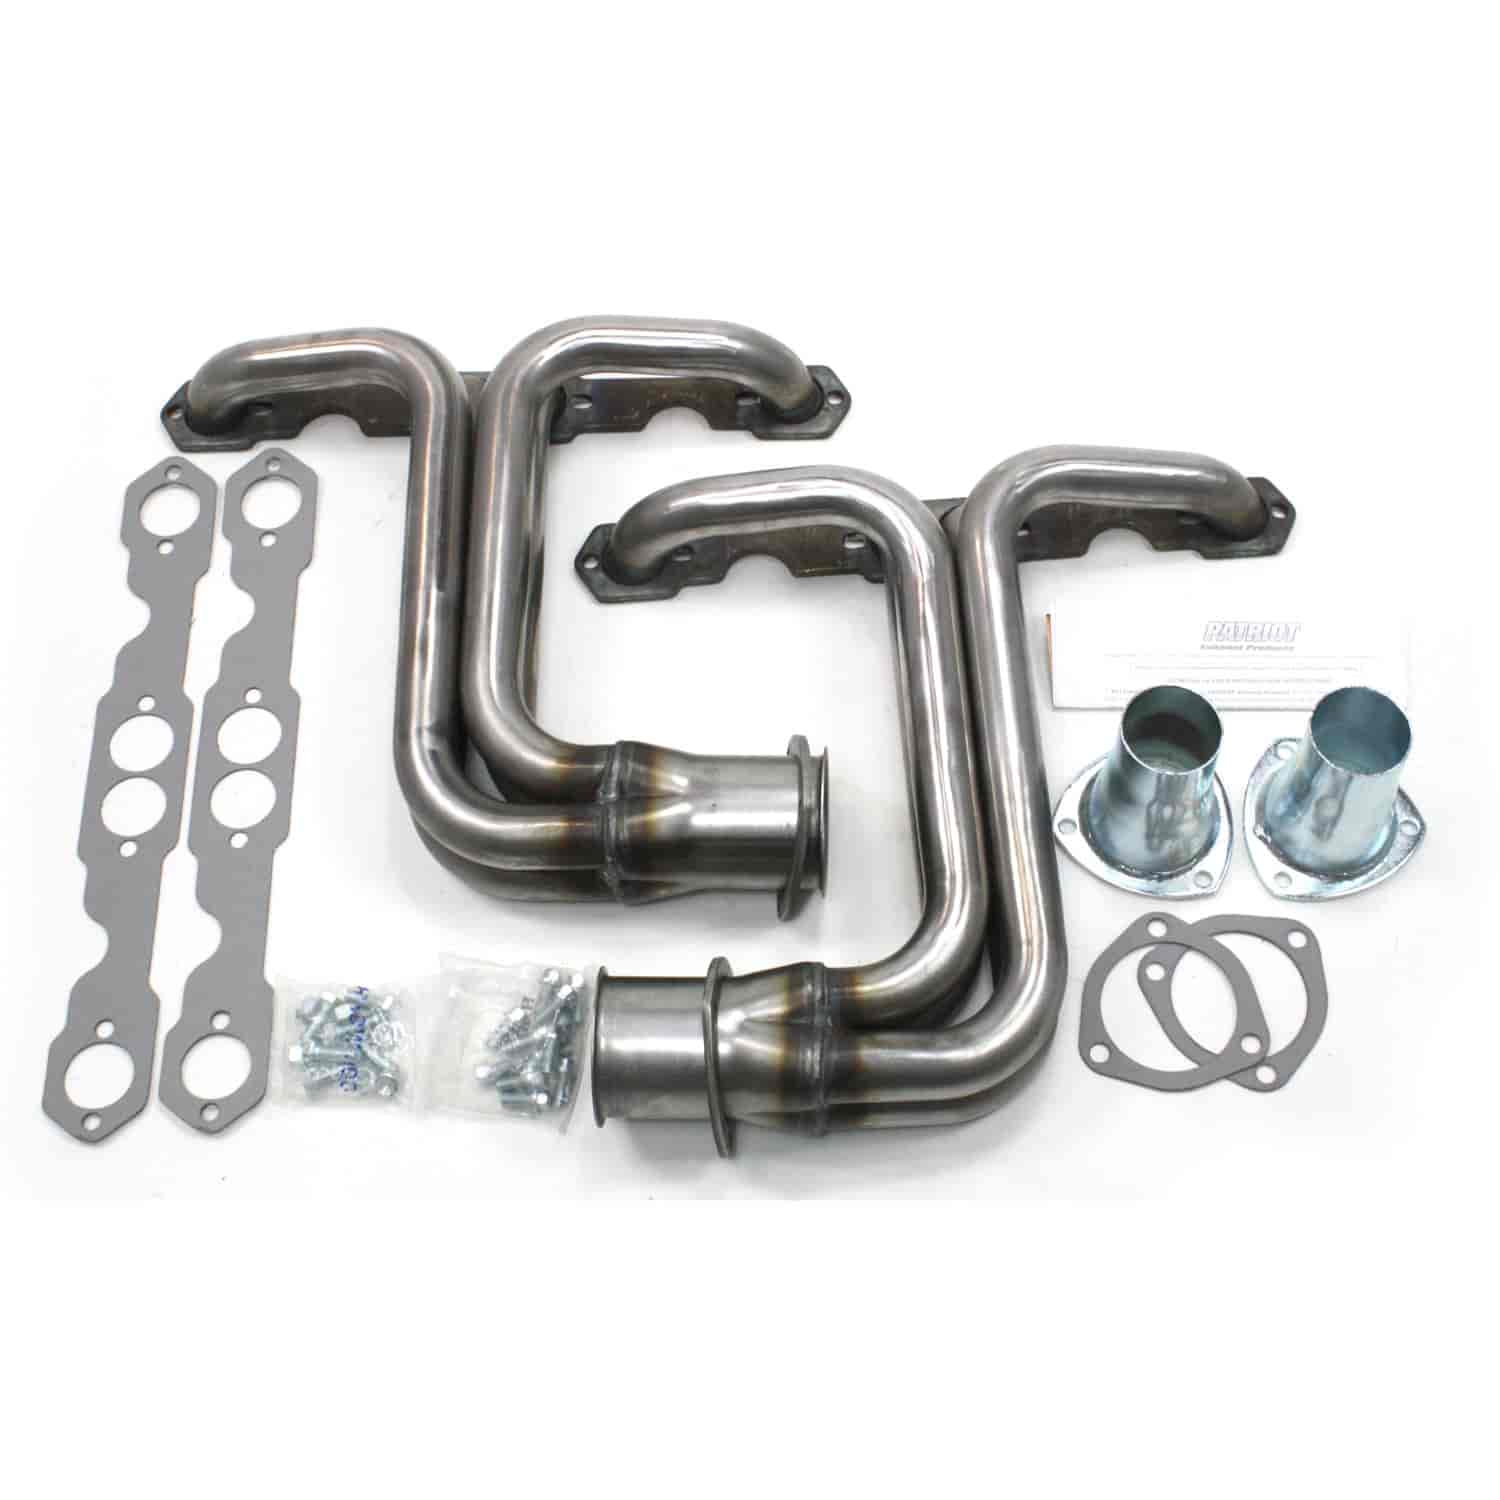 265-400 Small Block Header Chevy Engine on Ford Chassis Raw Finish